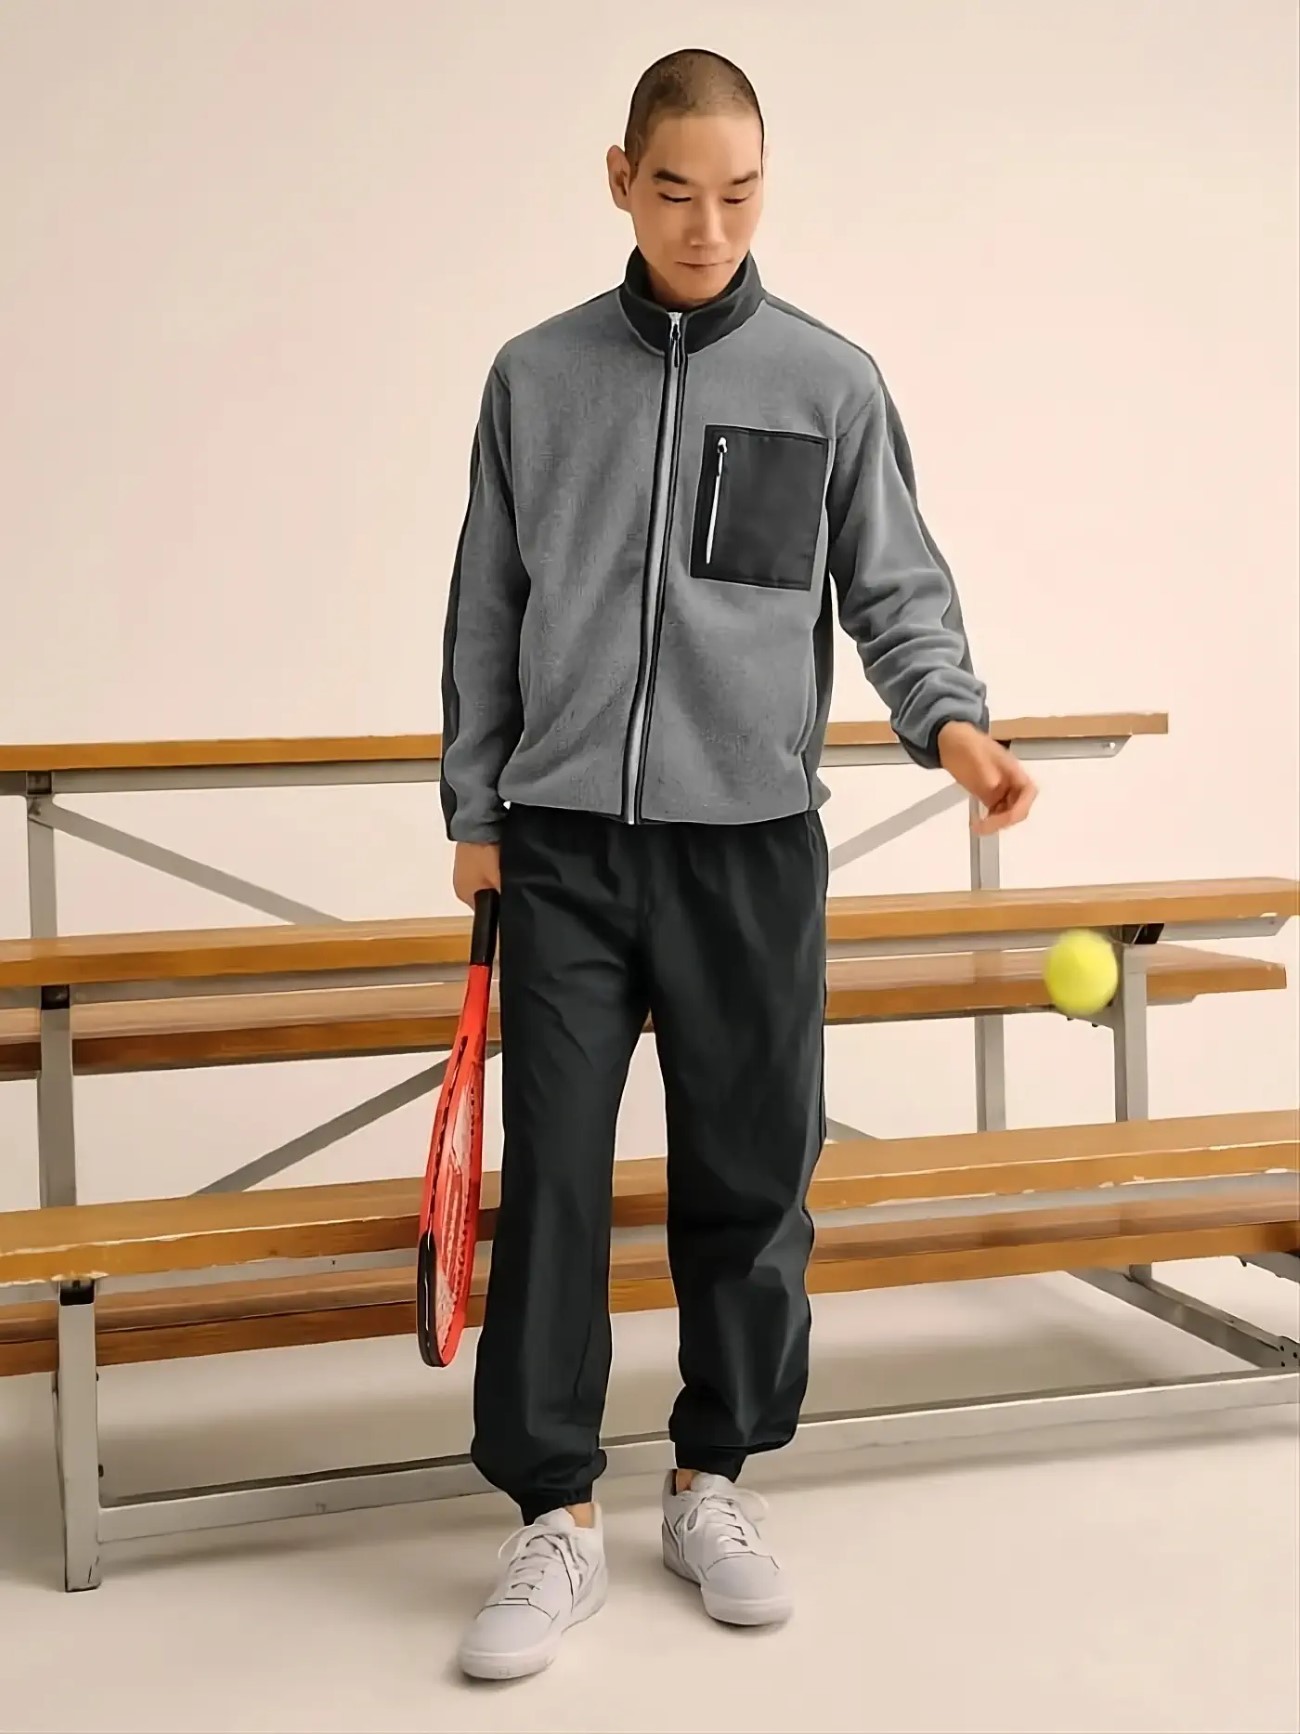 Uniqlo lines up fashion ace with Roger Federer and JW Anderson alliance